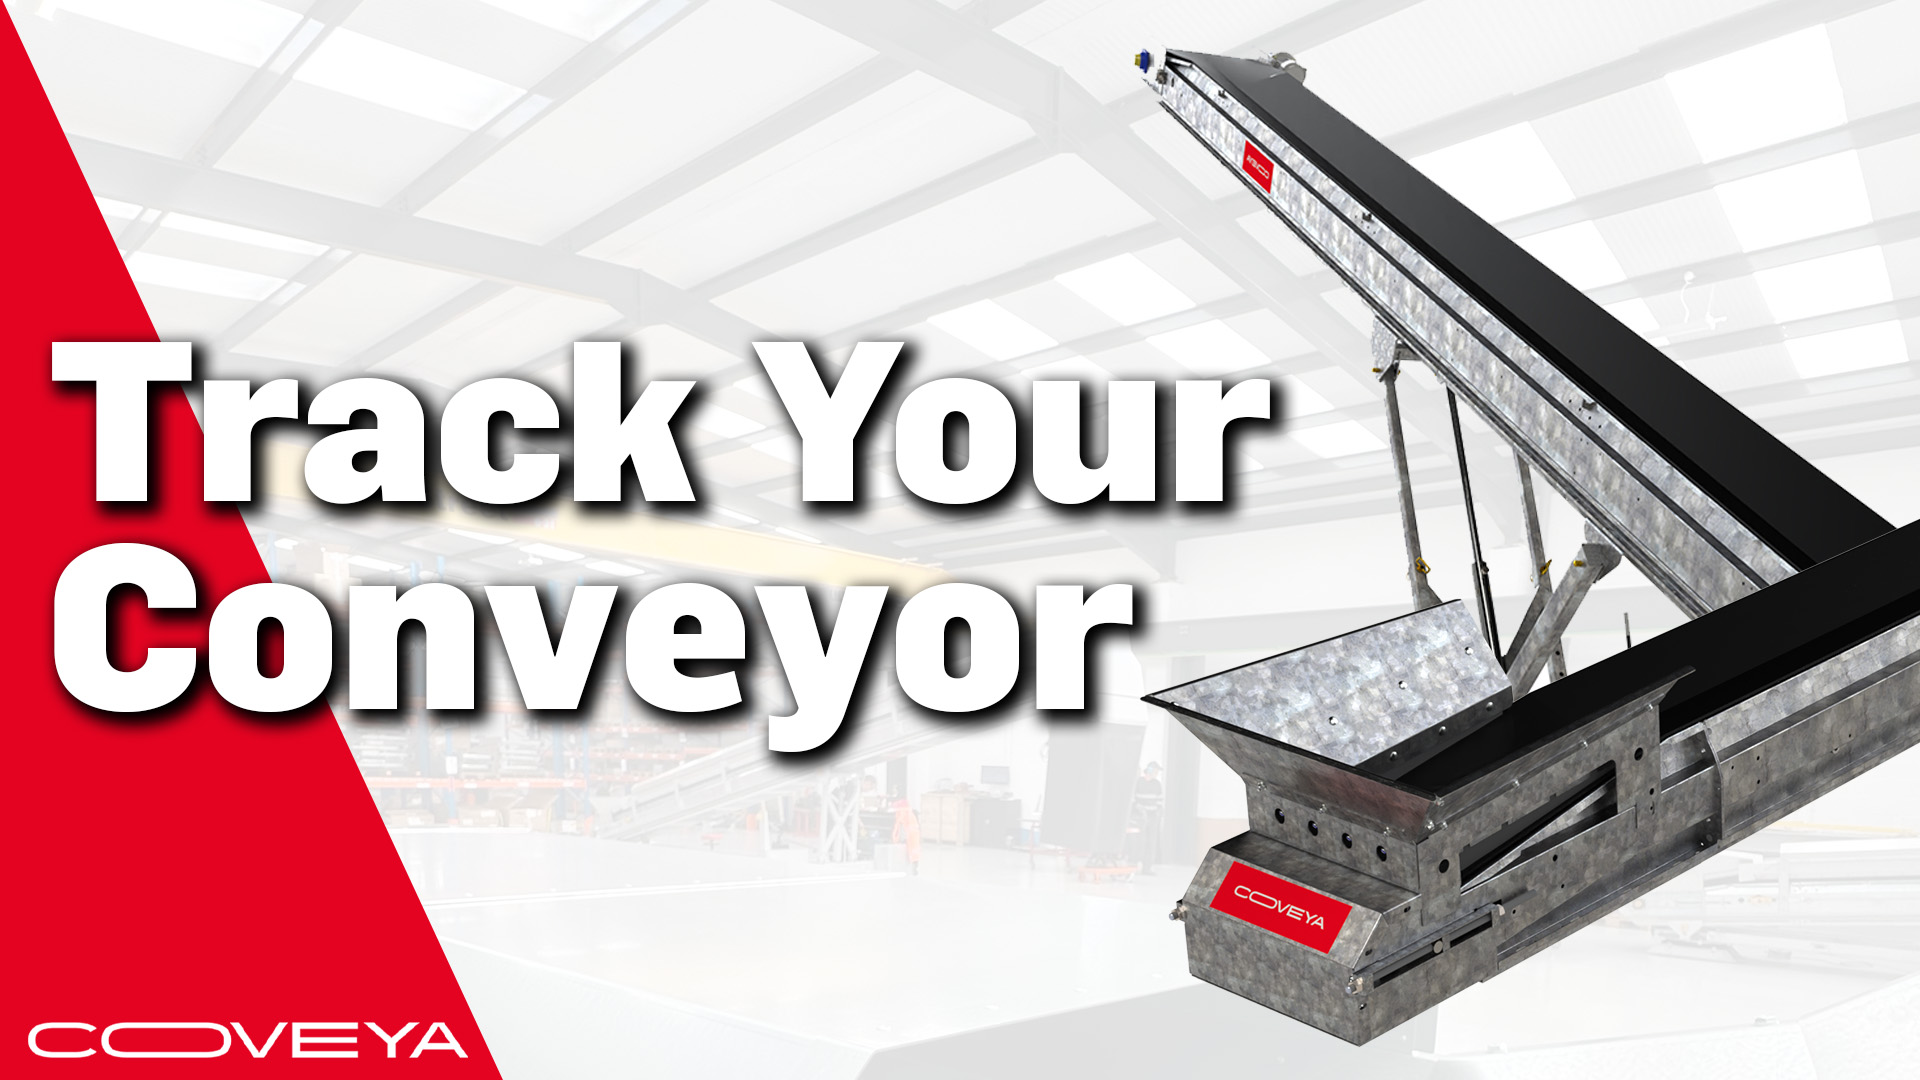 How To: Track Your Conveyor